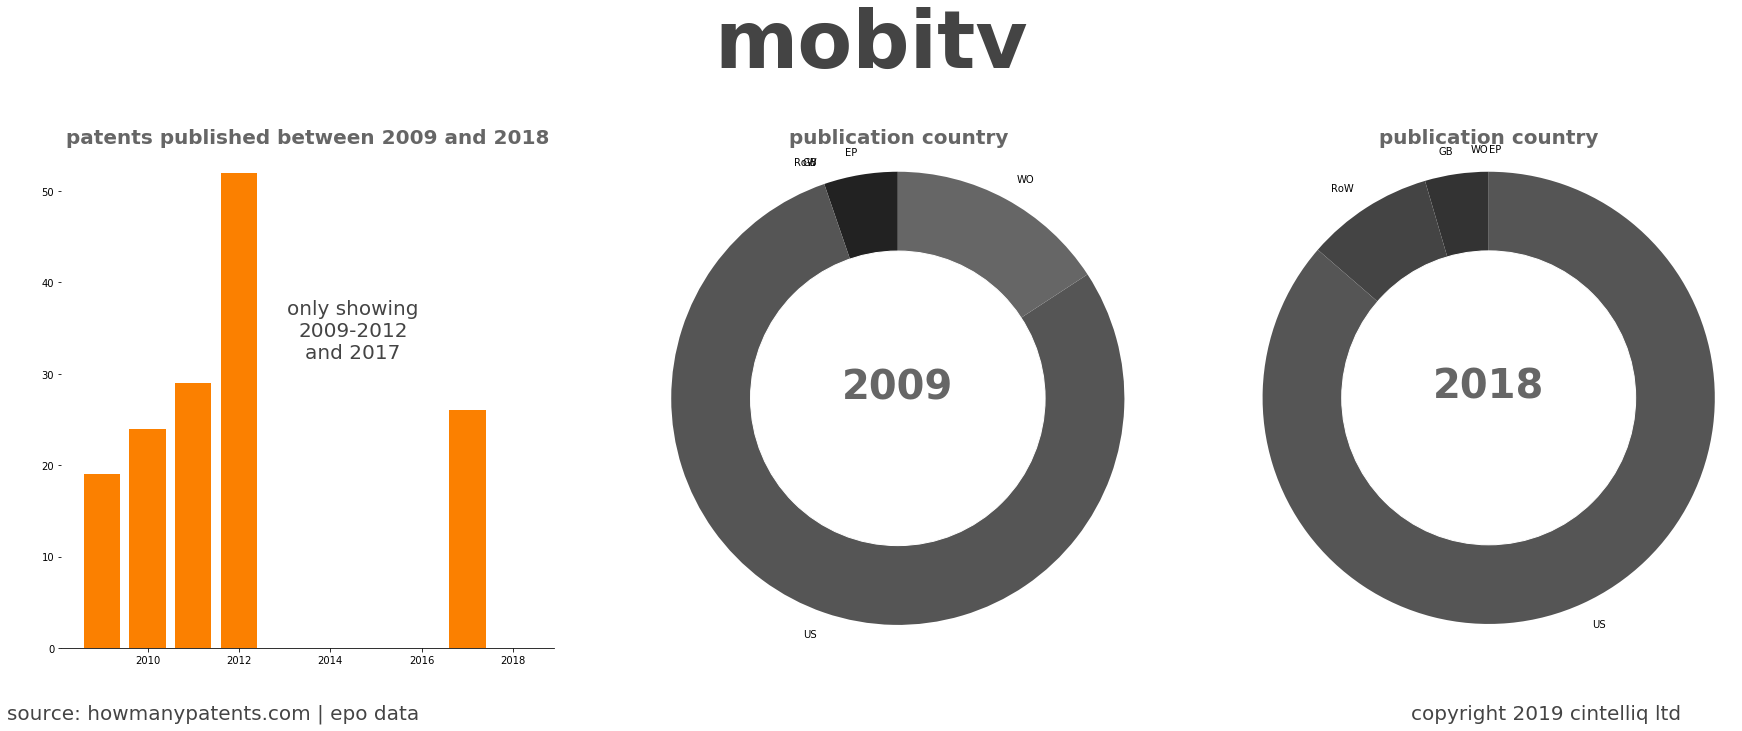 summary of patents for Mobitv